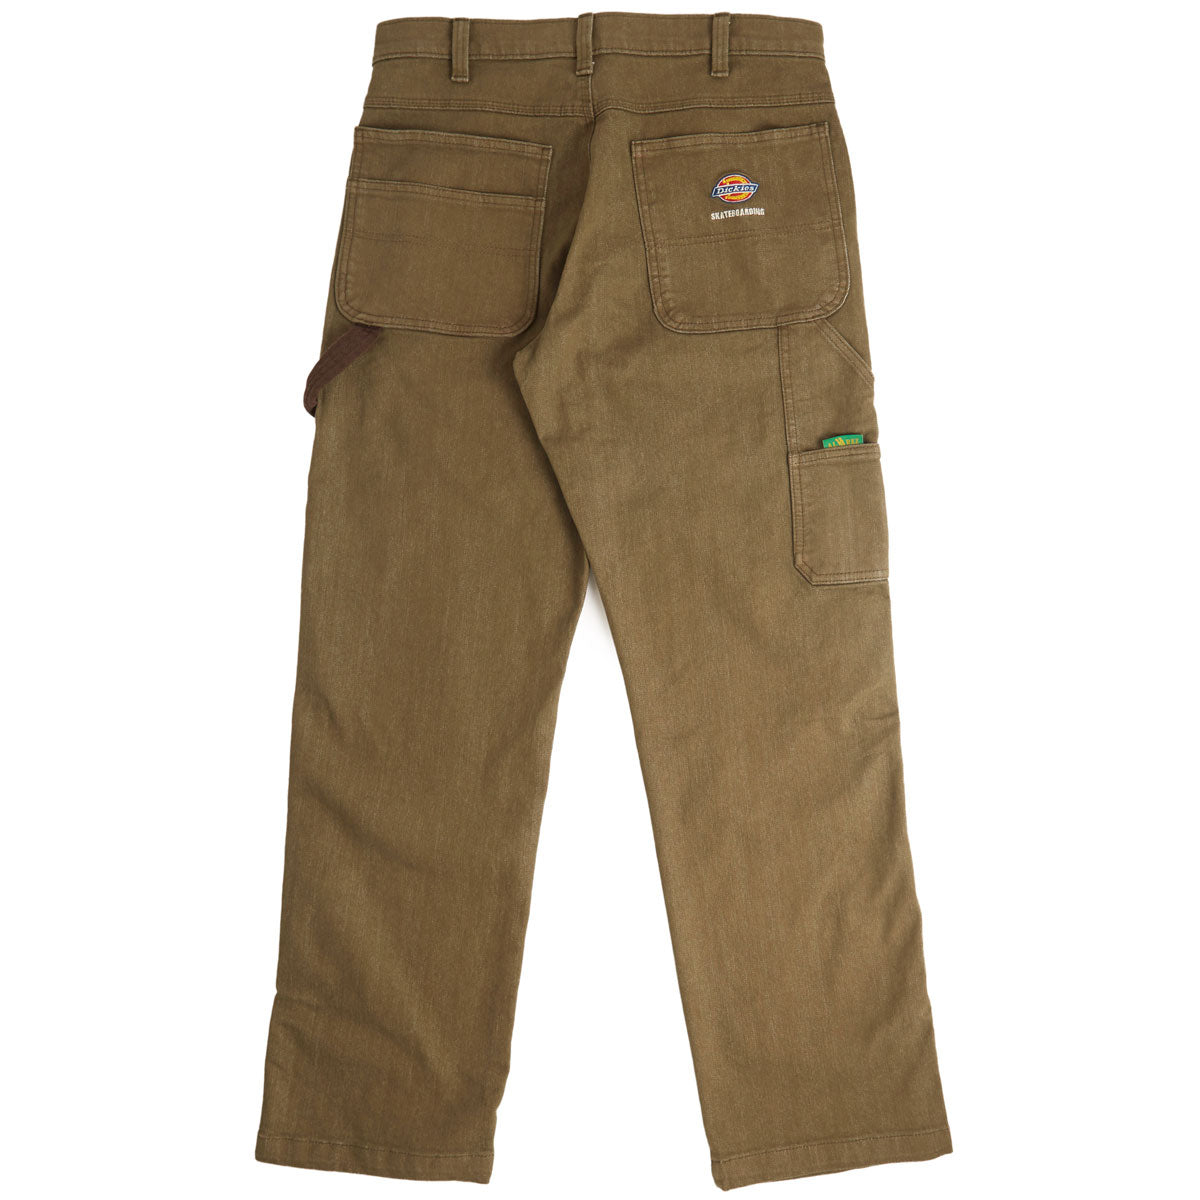 Dickies Vincent Alvarez Relaxed Fit Carpenter Pants - Military Green image 2